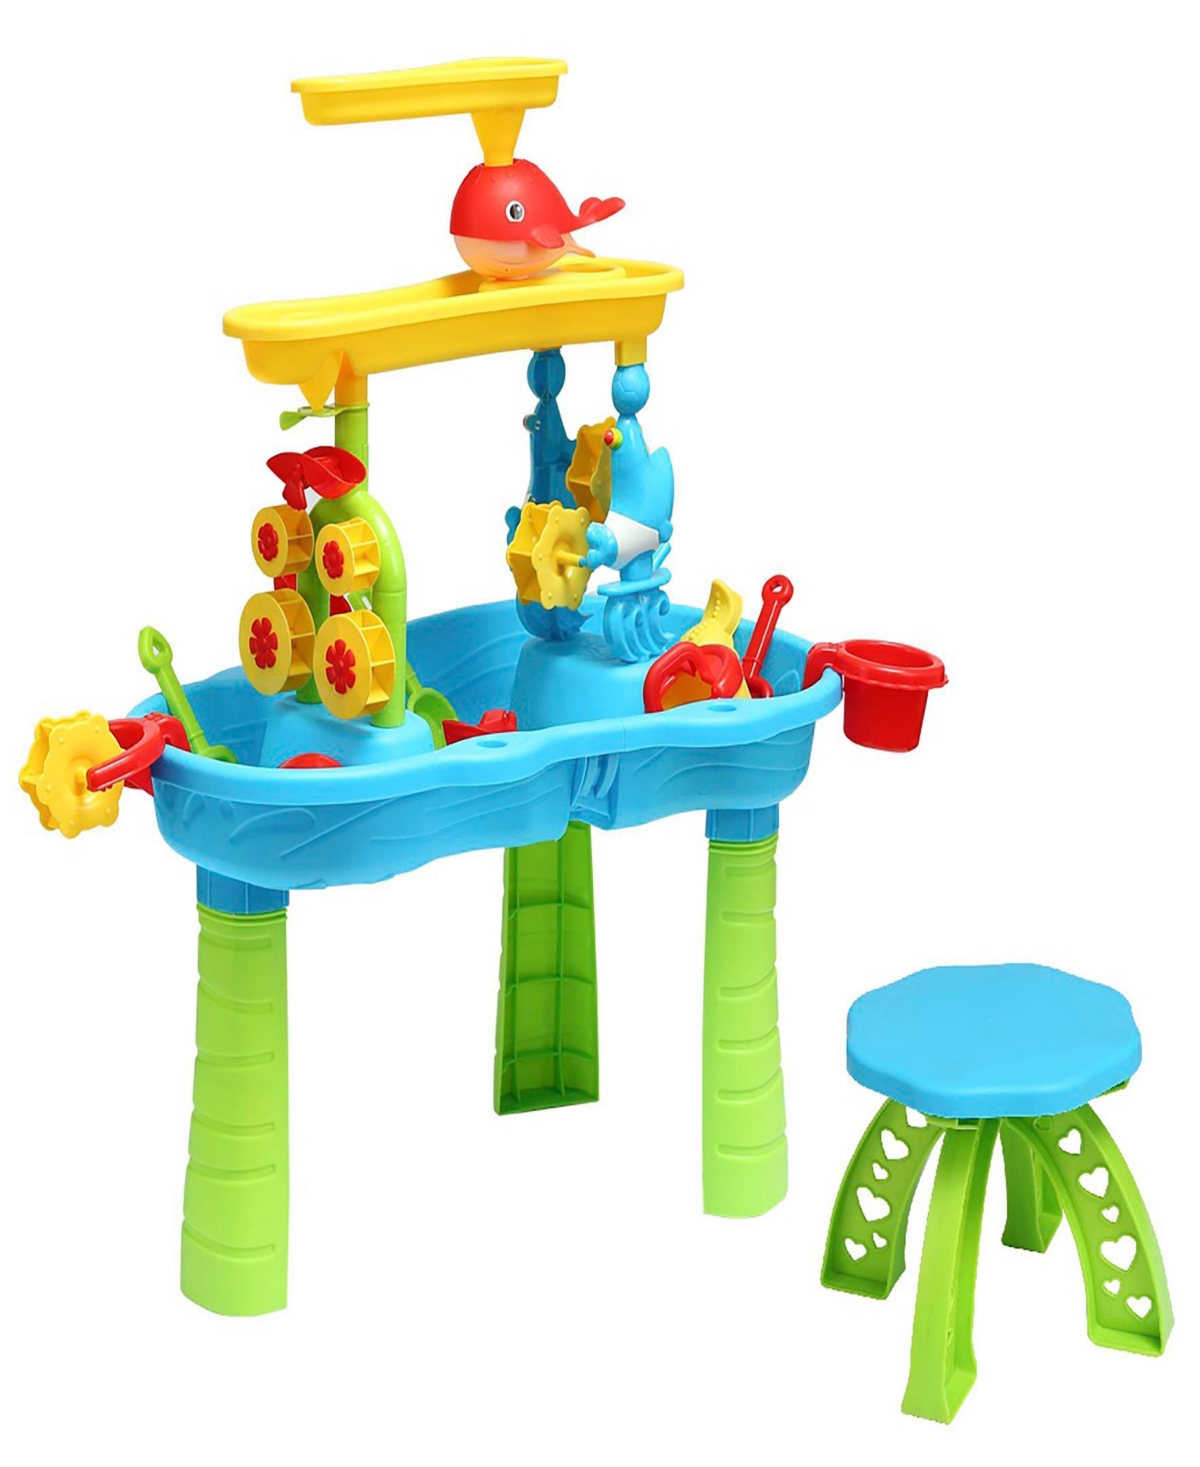 Trimate Kids' - Sensory Sand And Water 3 Tier Table In Multi